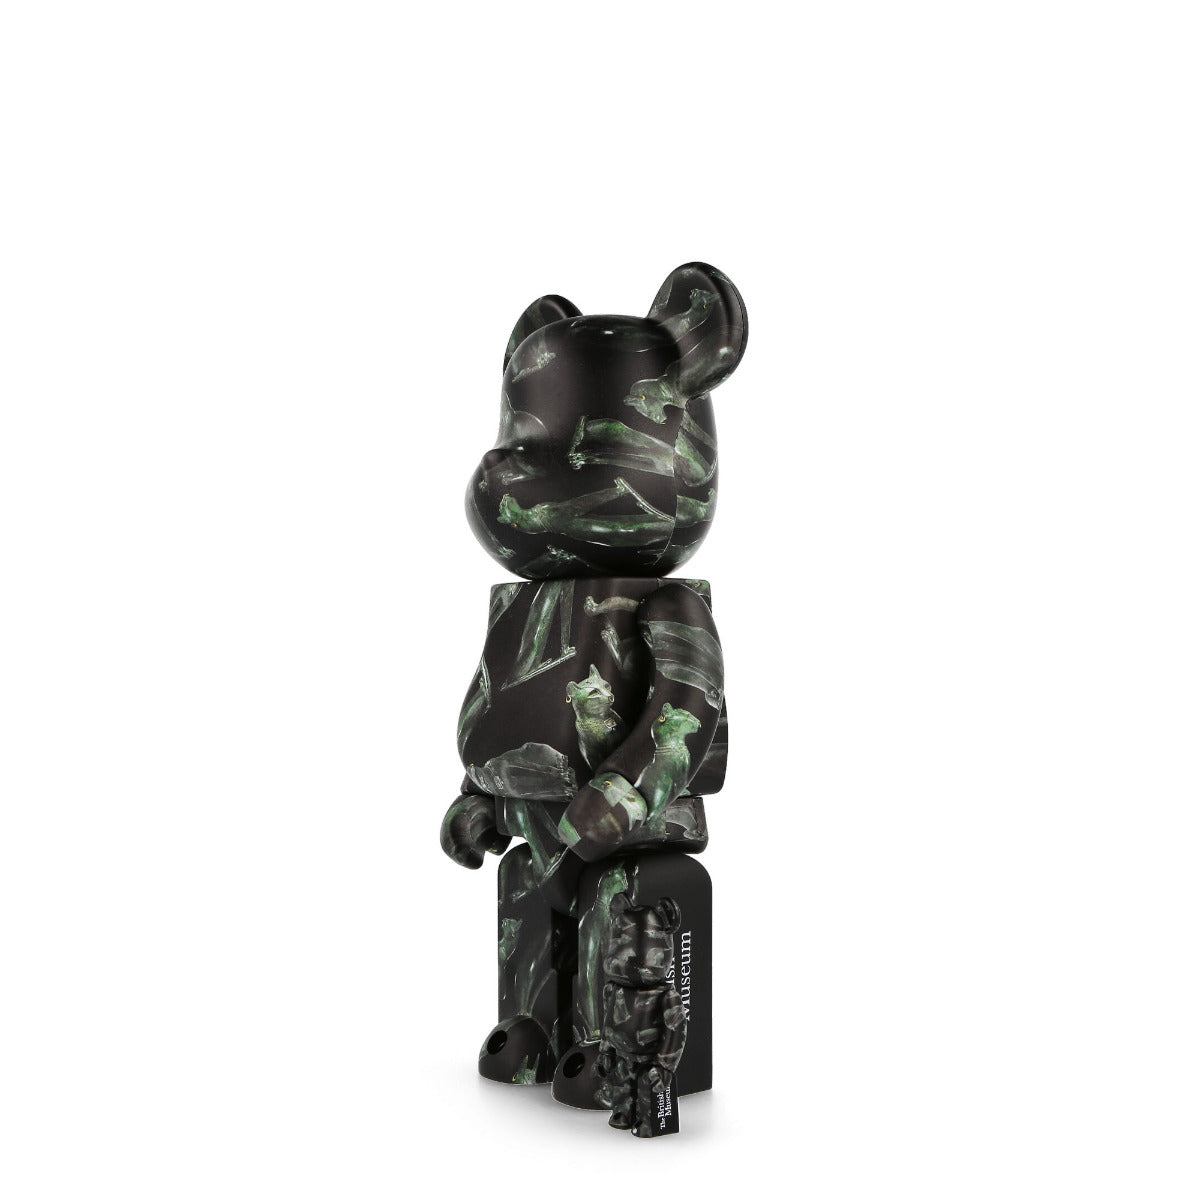 Be@rbrick The Gayer-Anderson Cat 400% + 100%